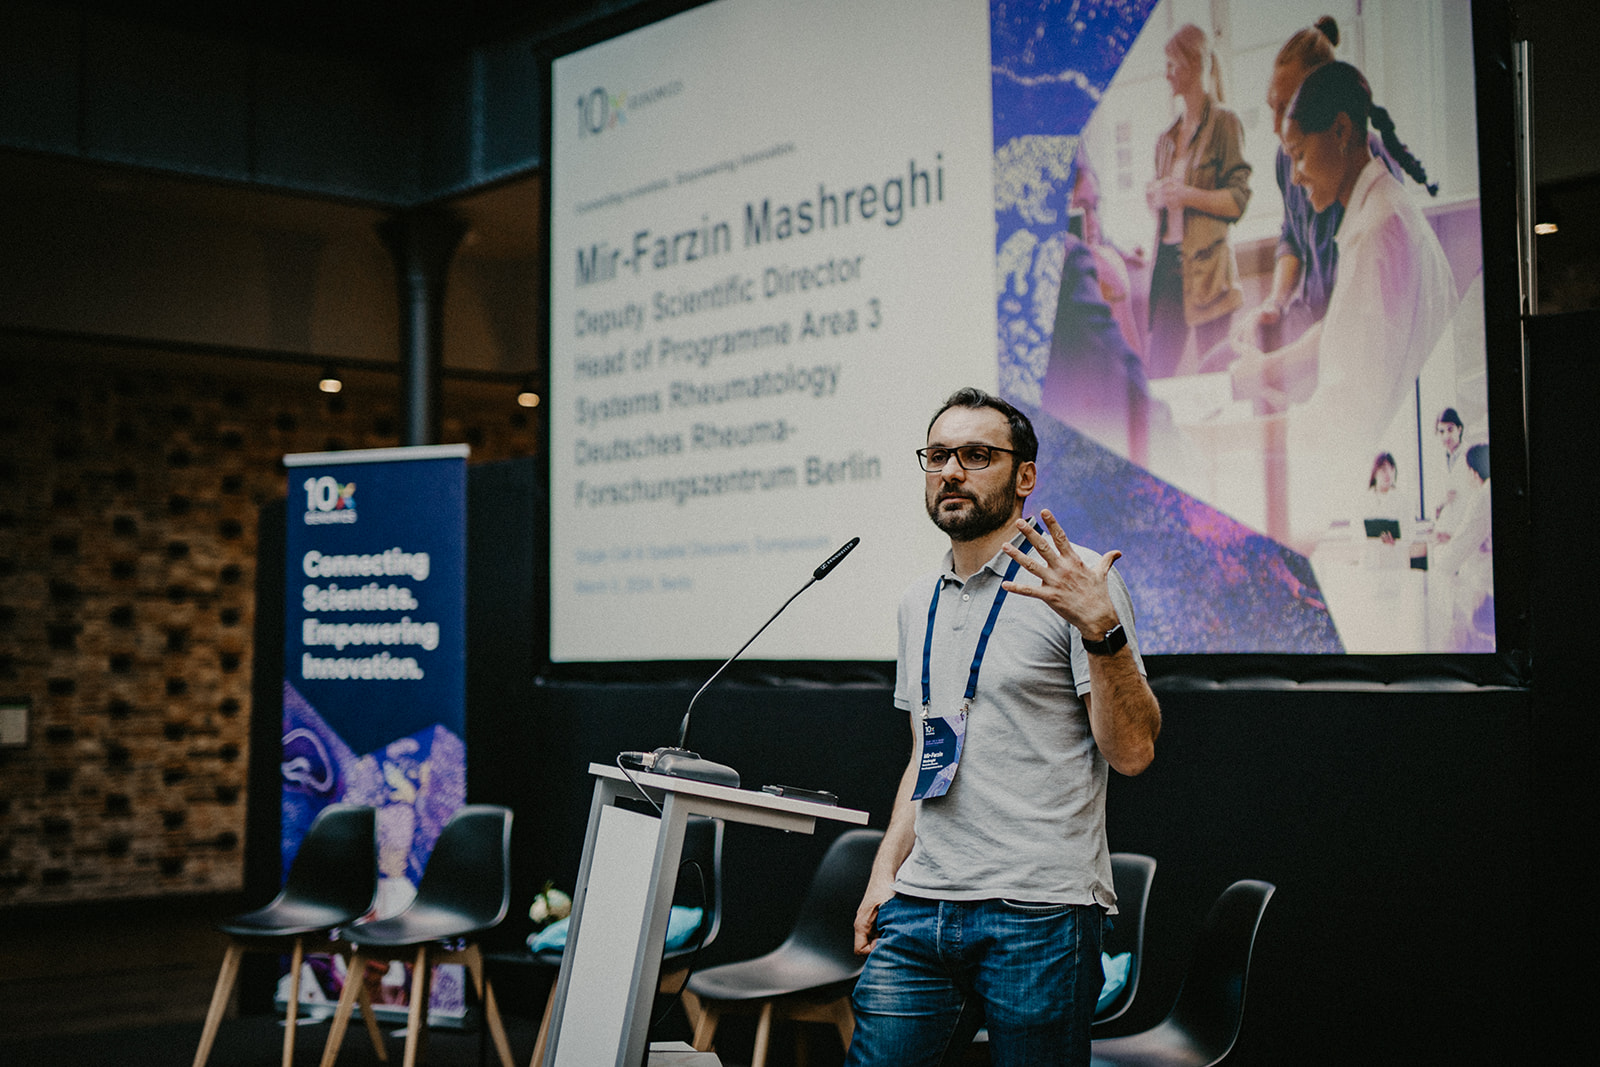 Mir-Farzin Mashreghi, PhD, presenting research at the 10x Genomics Single Cell & Spatial Discovery Symposium in Berlin.